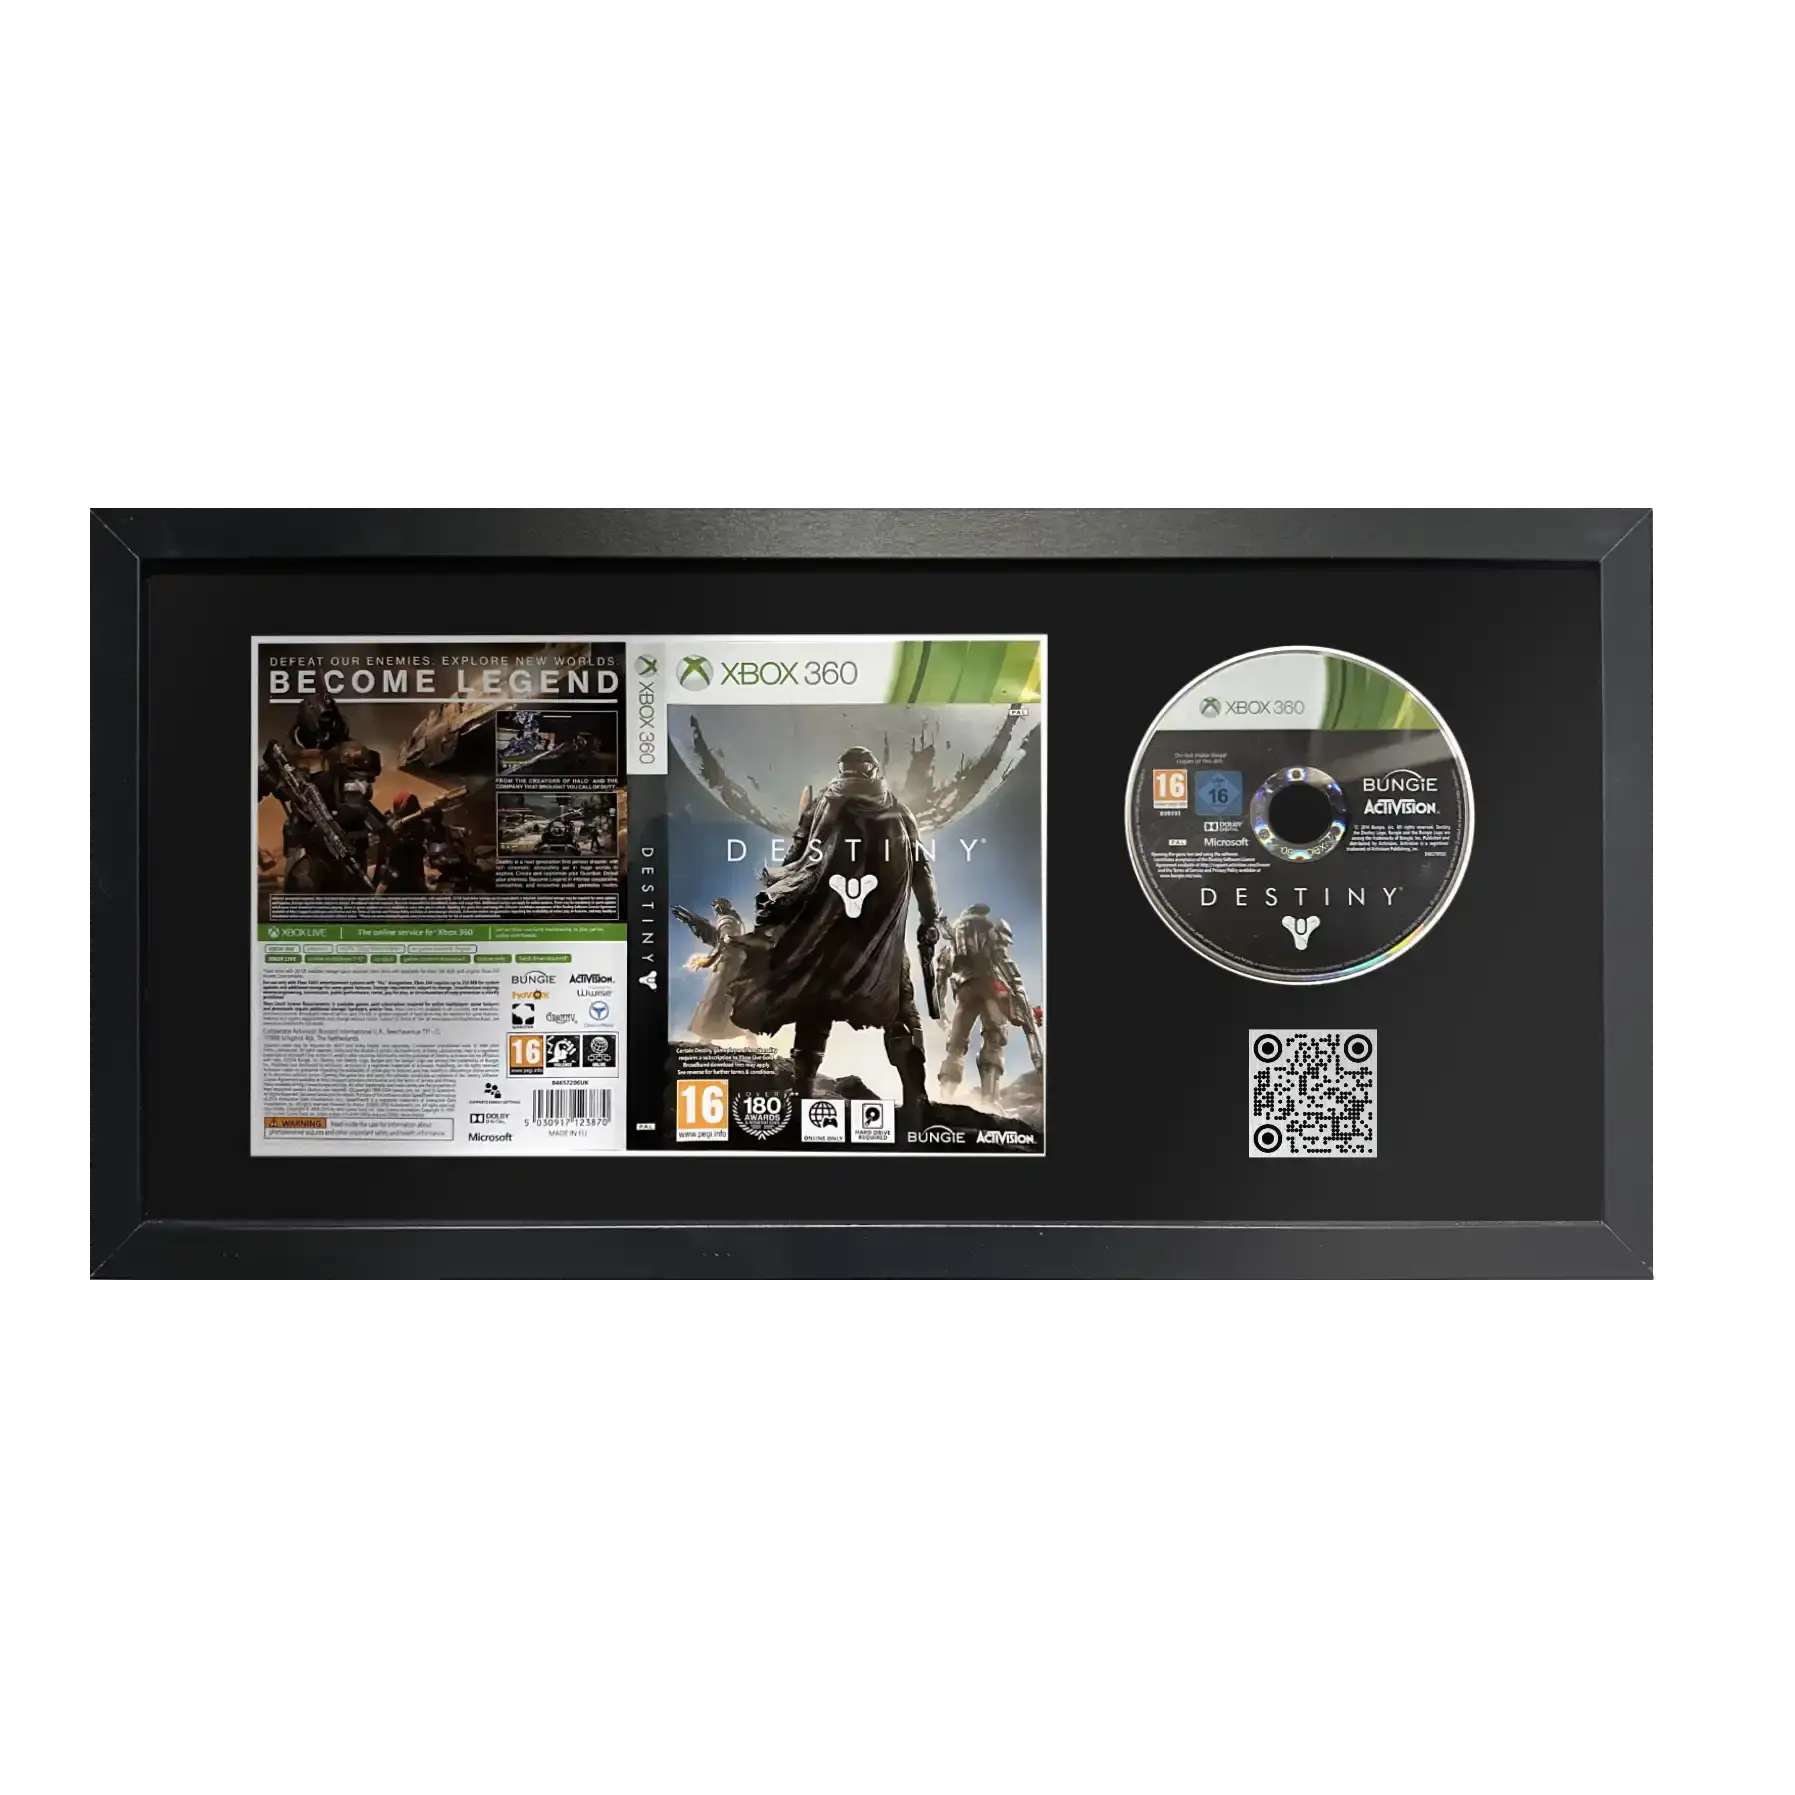 Destiny for Xbox 360 in a frame with a QR code